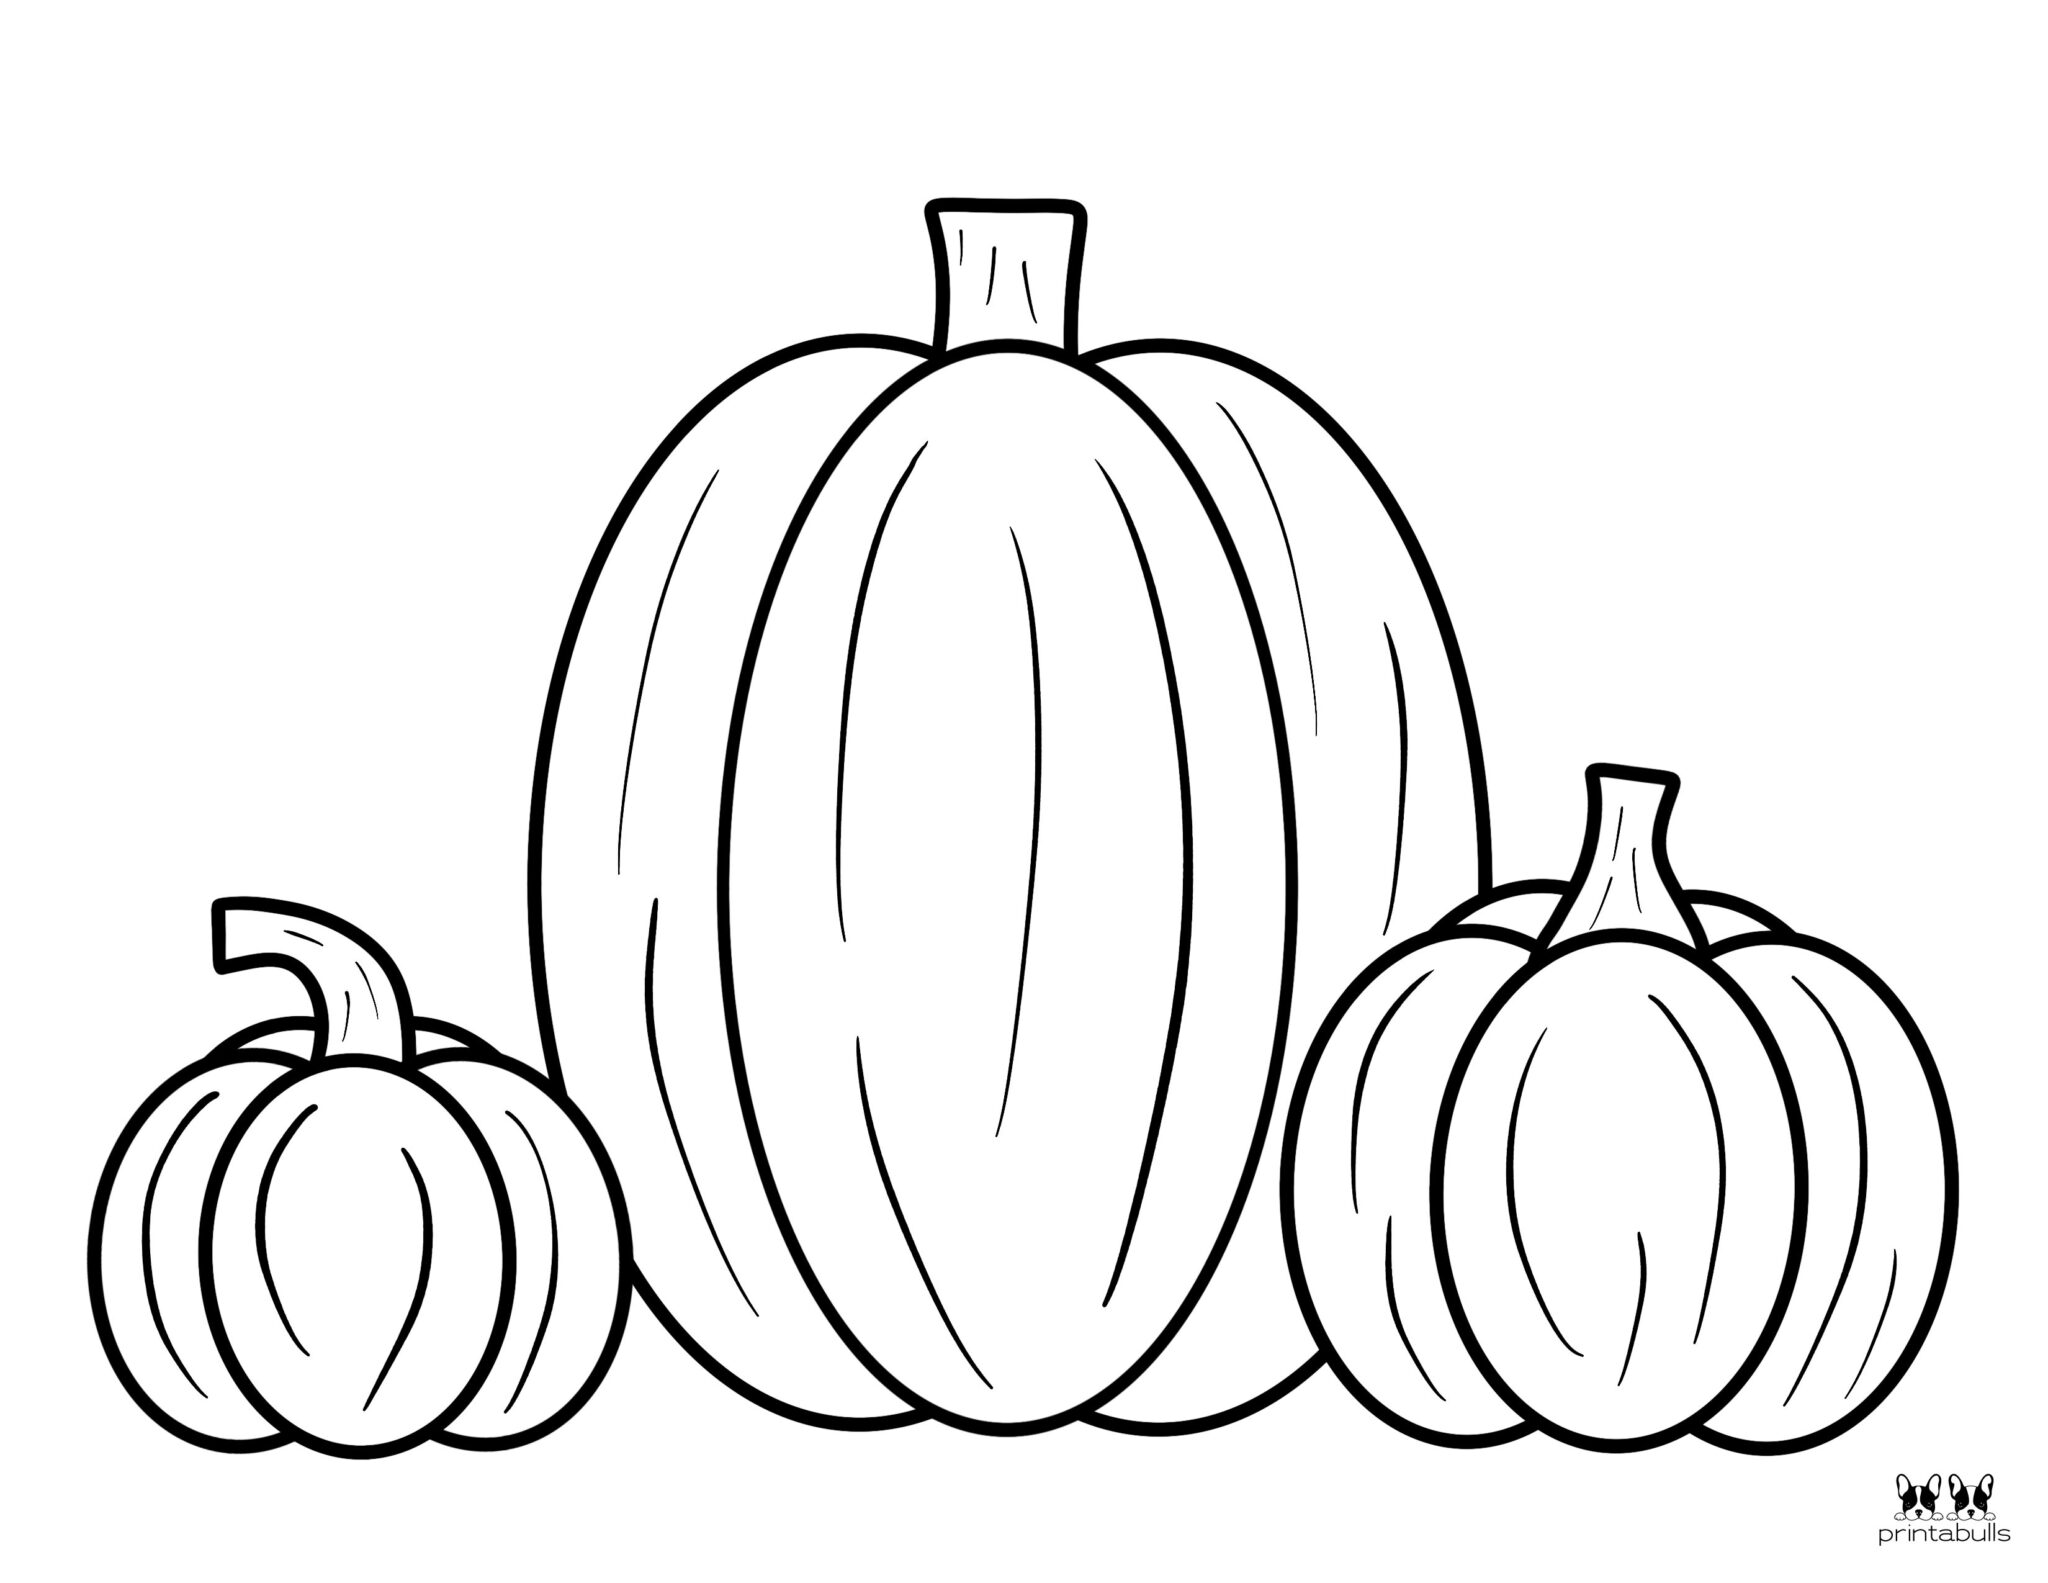 free-printable-coloring-pages-of-pumpkins-you-can-use-it-to-entertain-the-kids-over-the-holiday